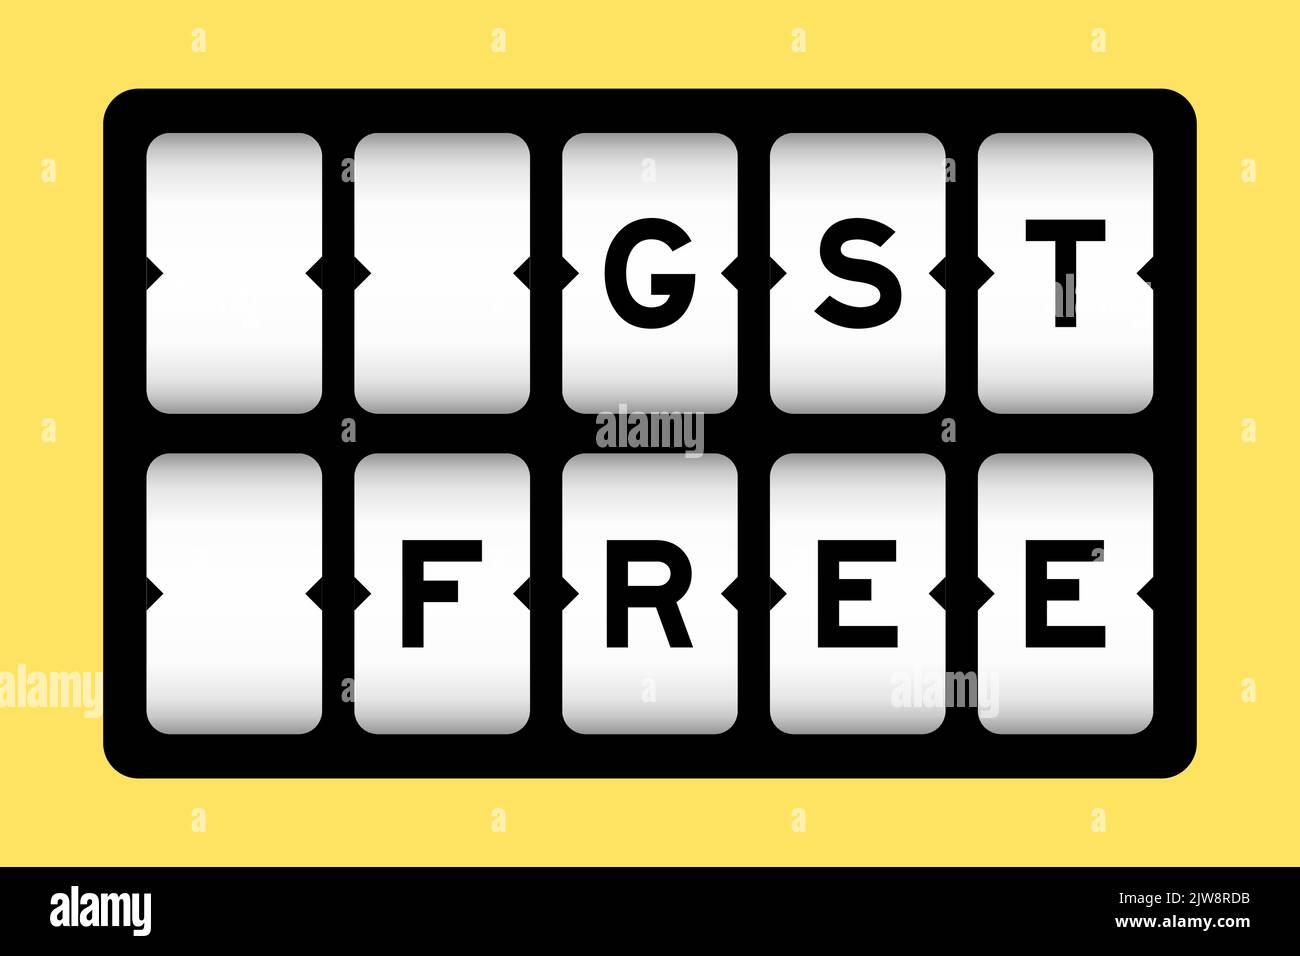 Black color in word GST (Abbreviation of Goods and Services Tax) free on slot banner with yellow color background Stock Vector